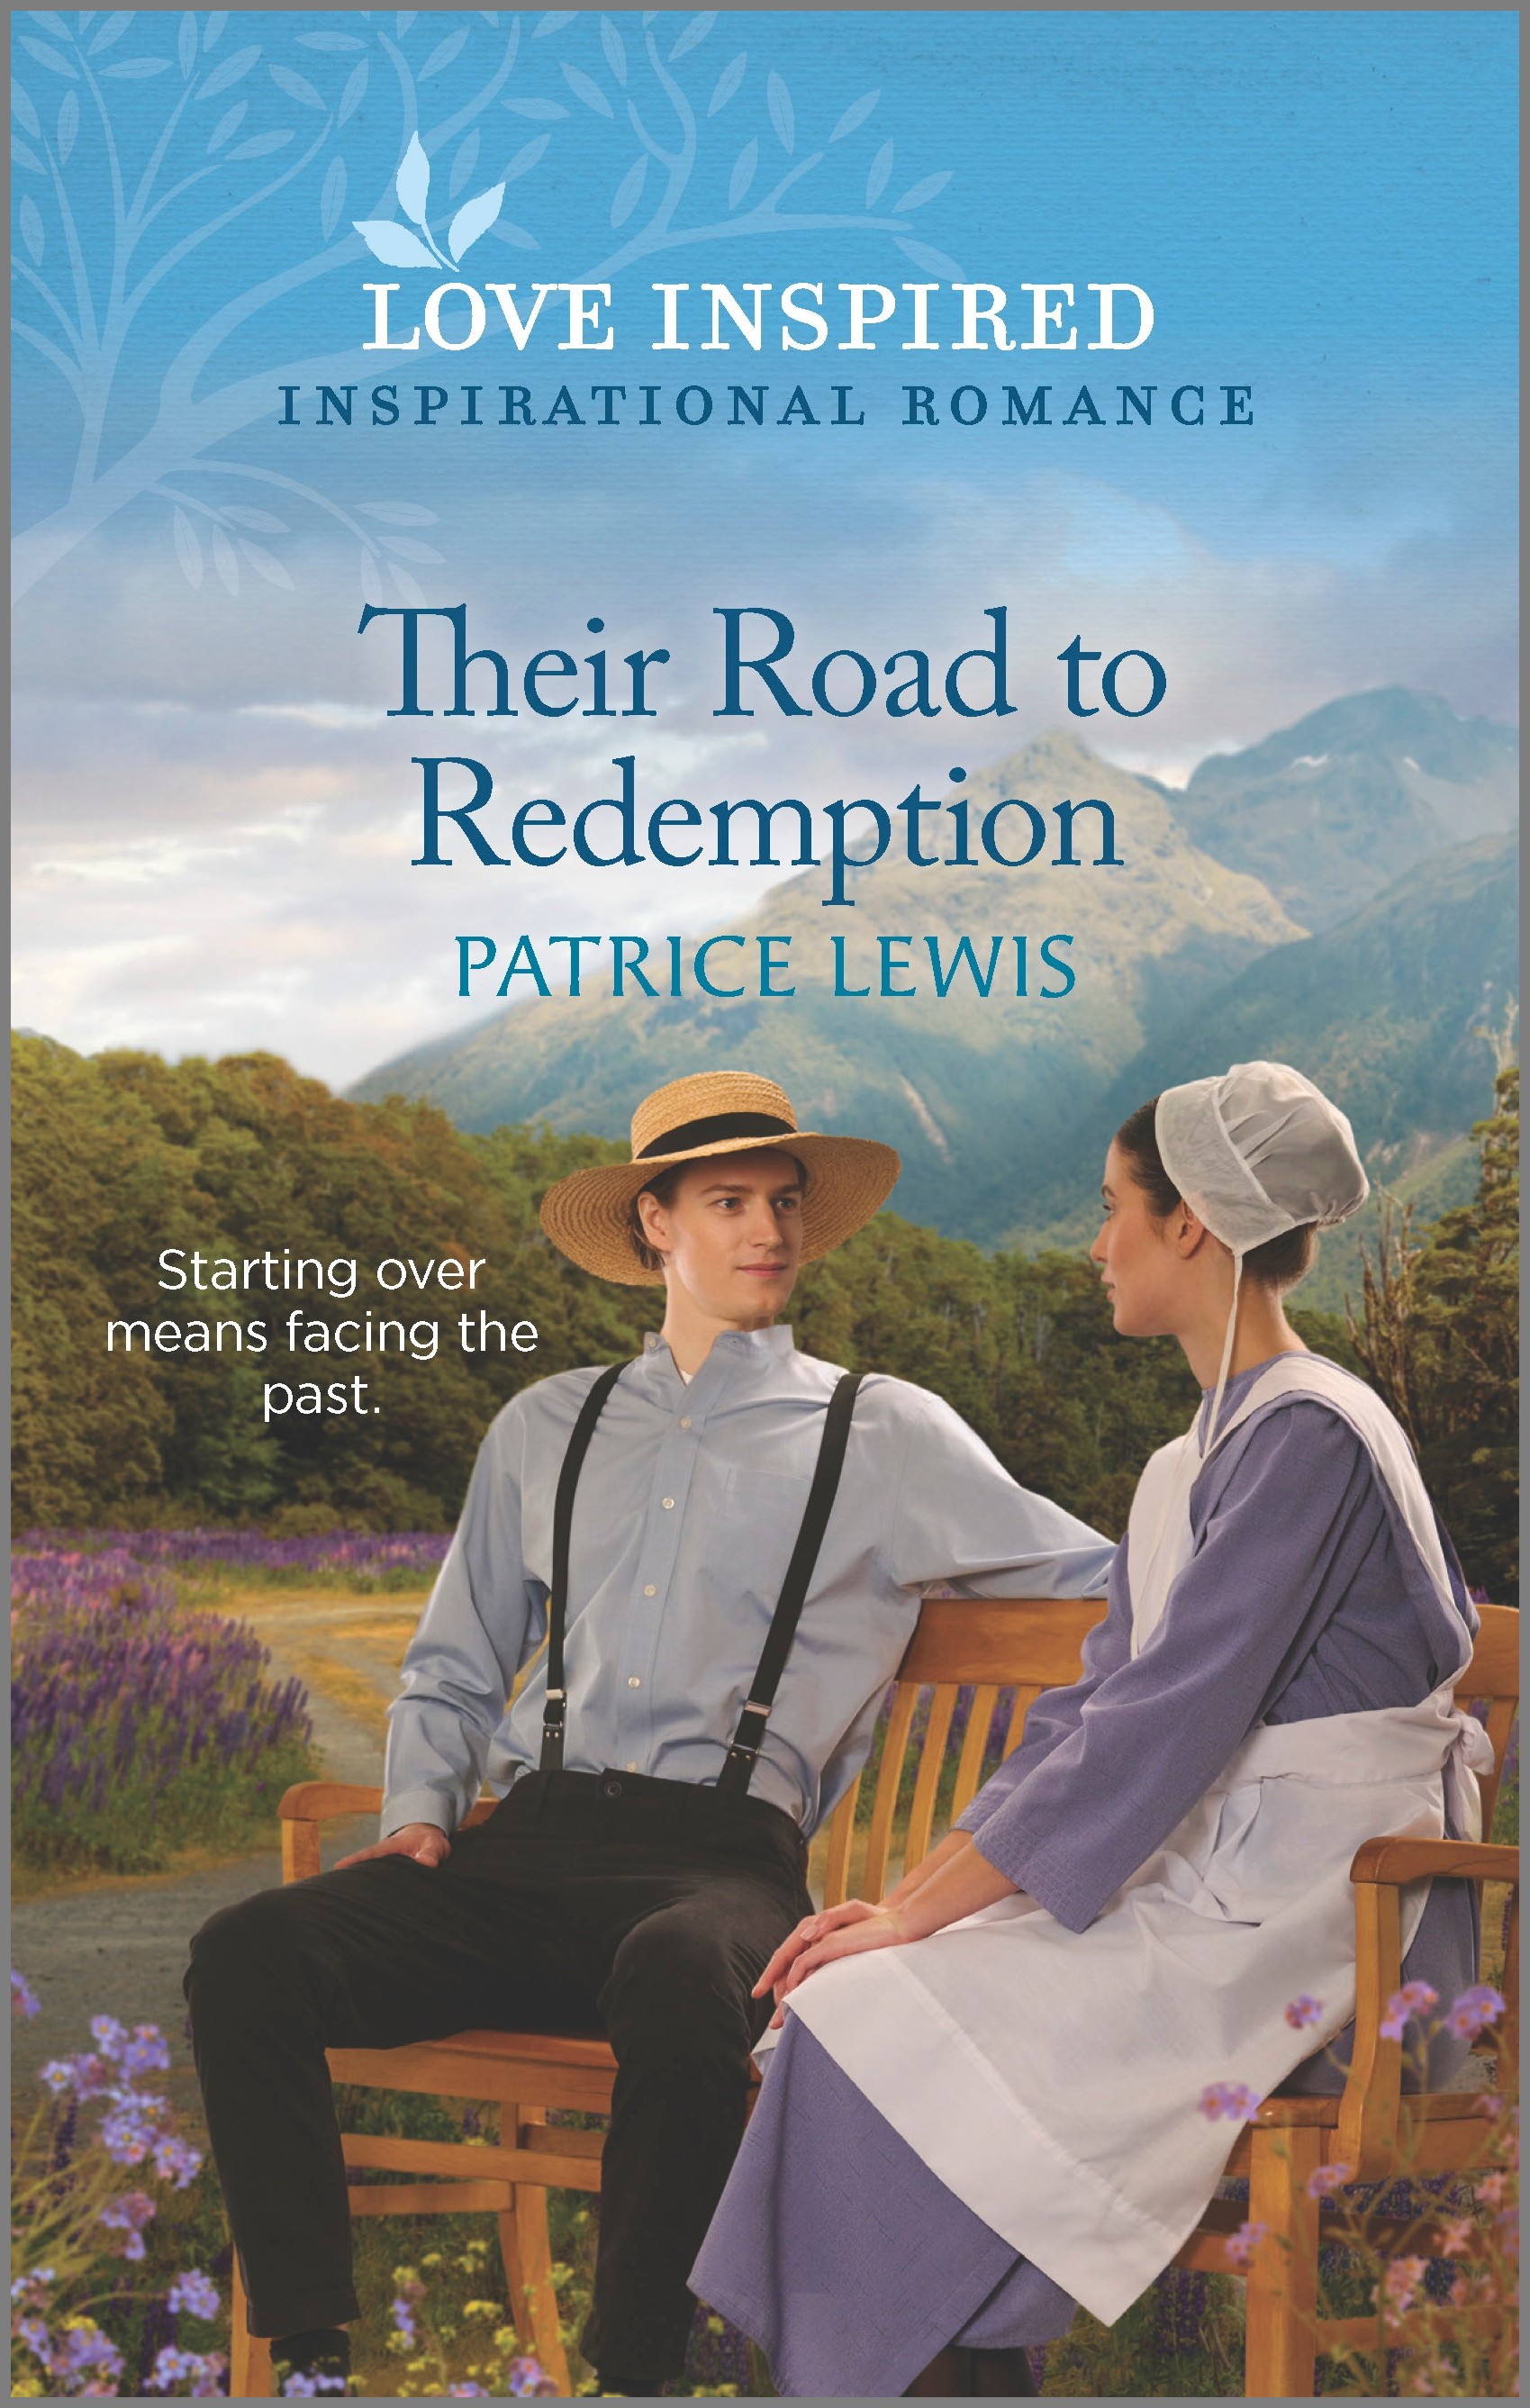 Cover image for THEIR ROAD TO REDEMPTION by Patrice Lewis, featuring an amish man and woman sitting on a wooden bench outdoors, surrounded by purple flowers.